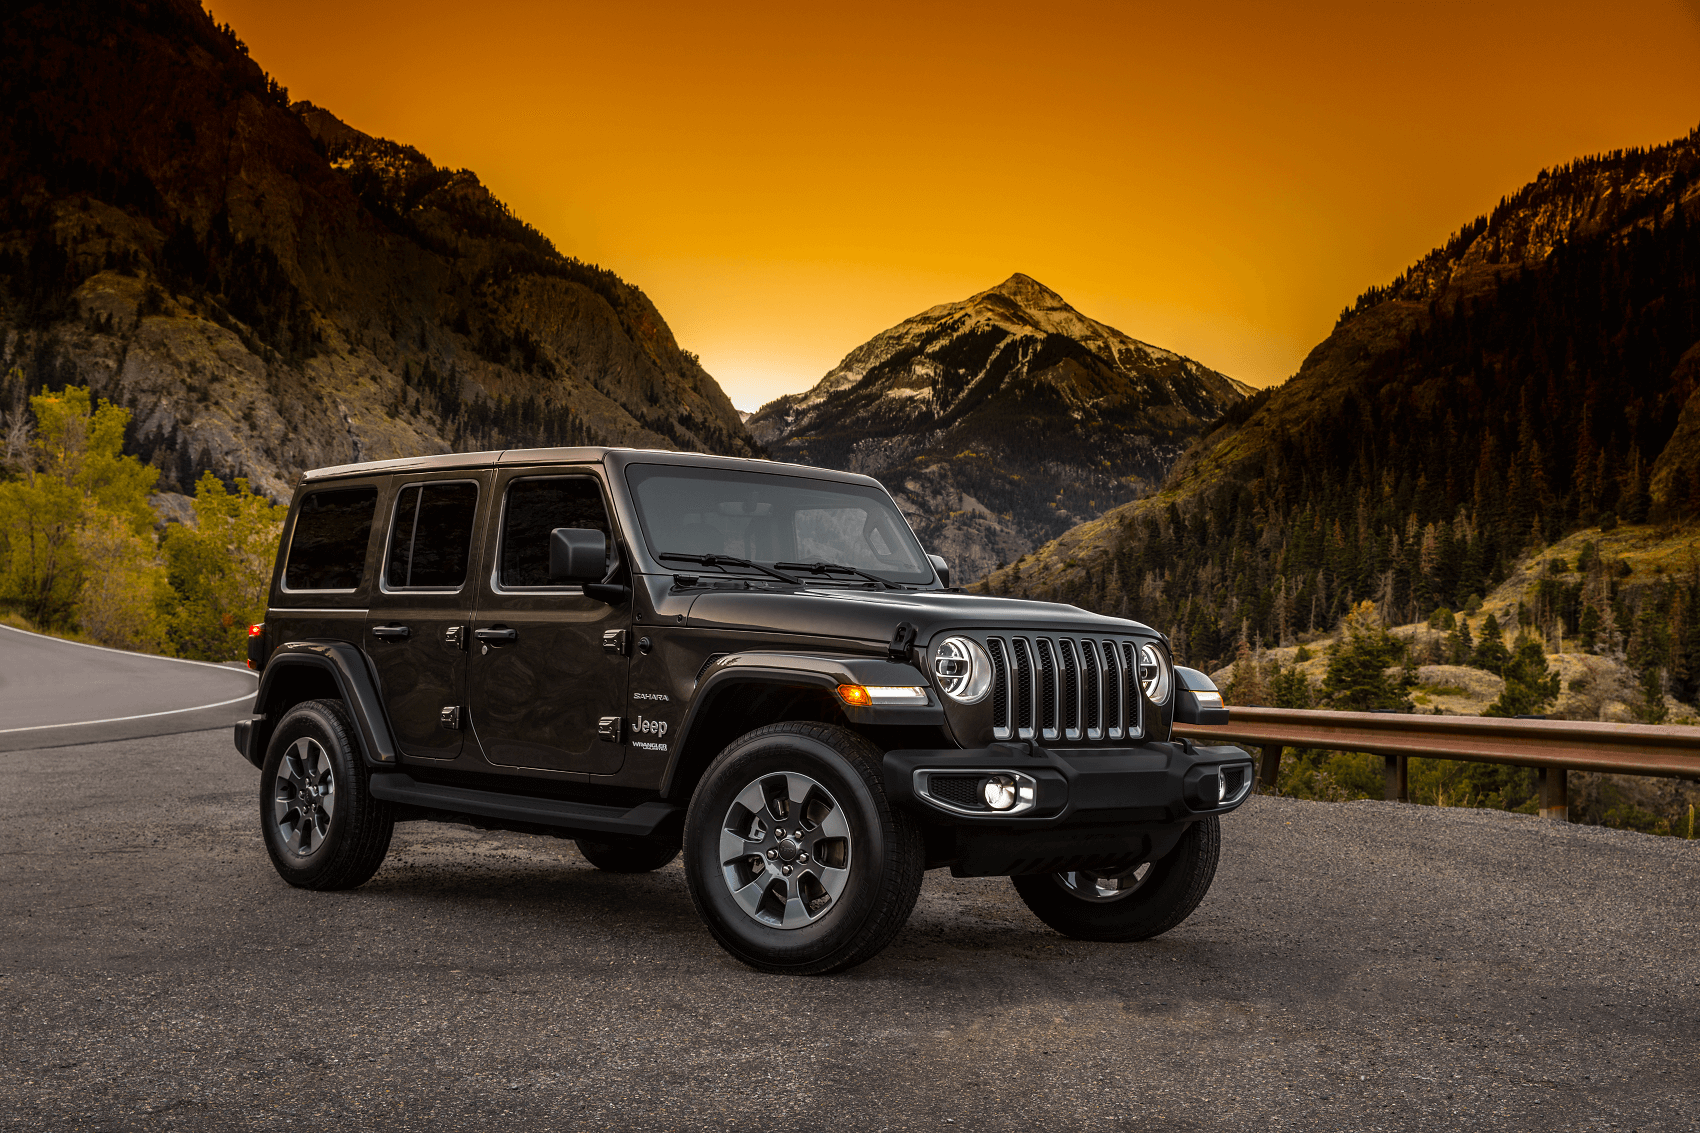 Used Jeep Wrangler for Sale Frederick MD
